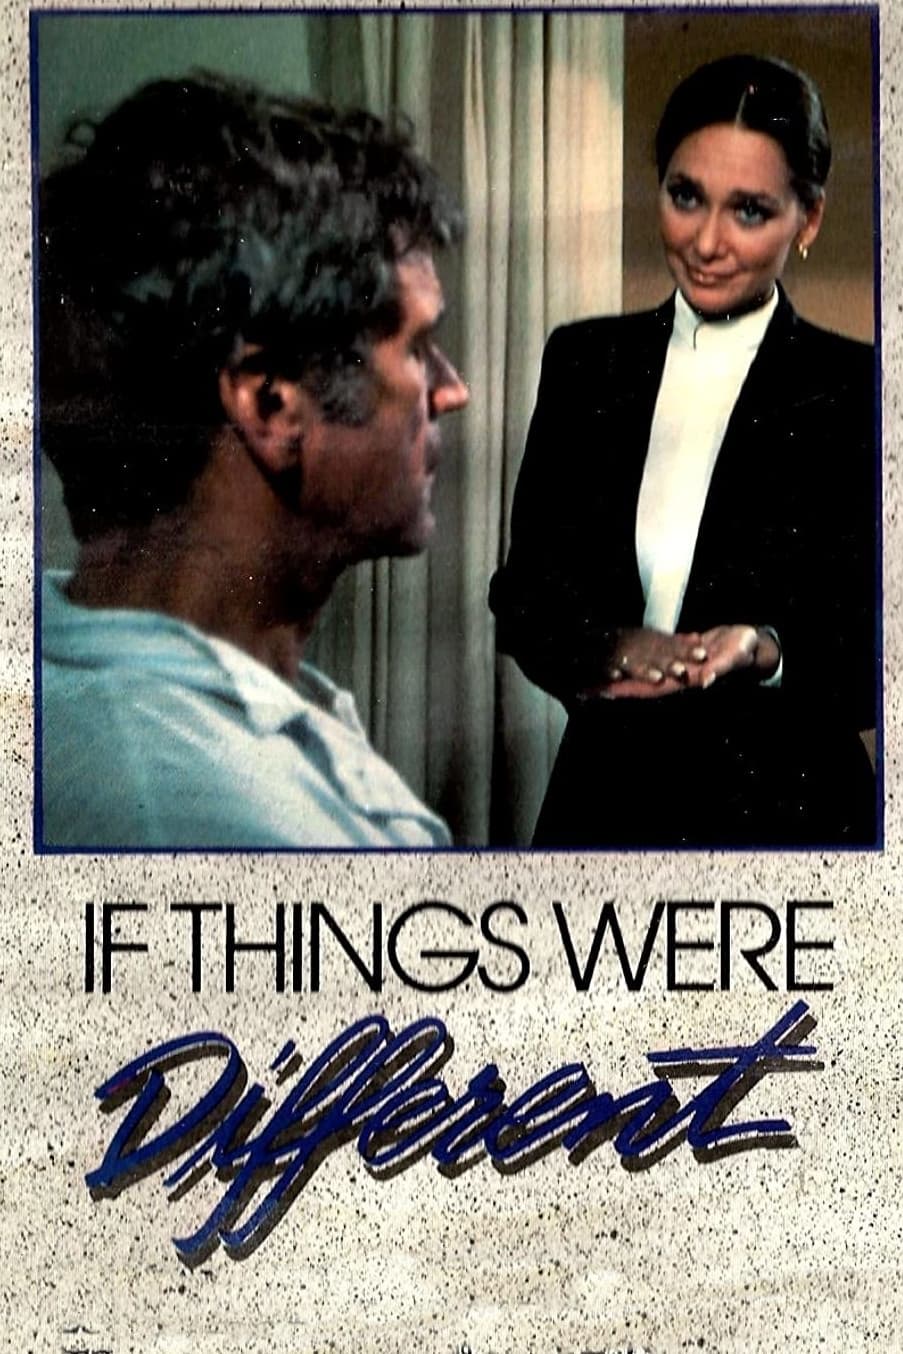 If Things Were Different (1980)